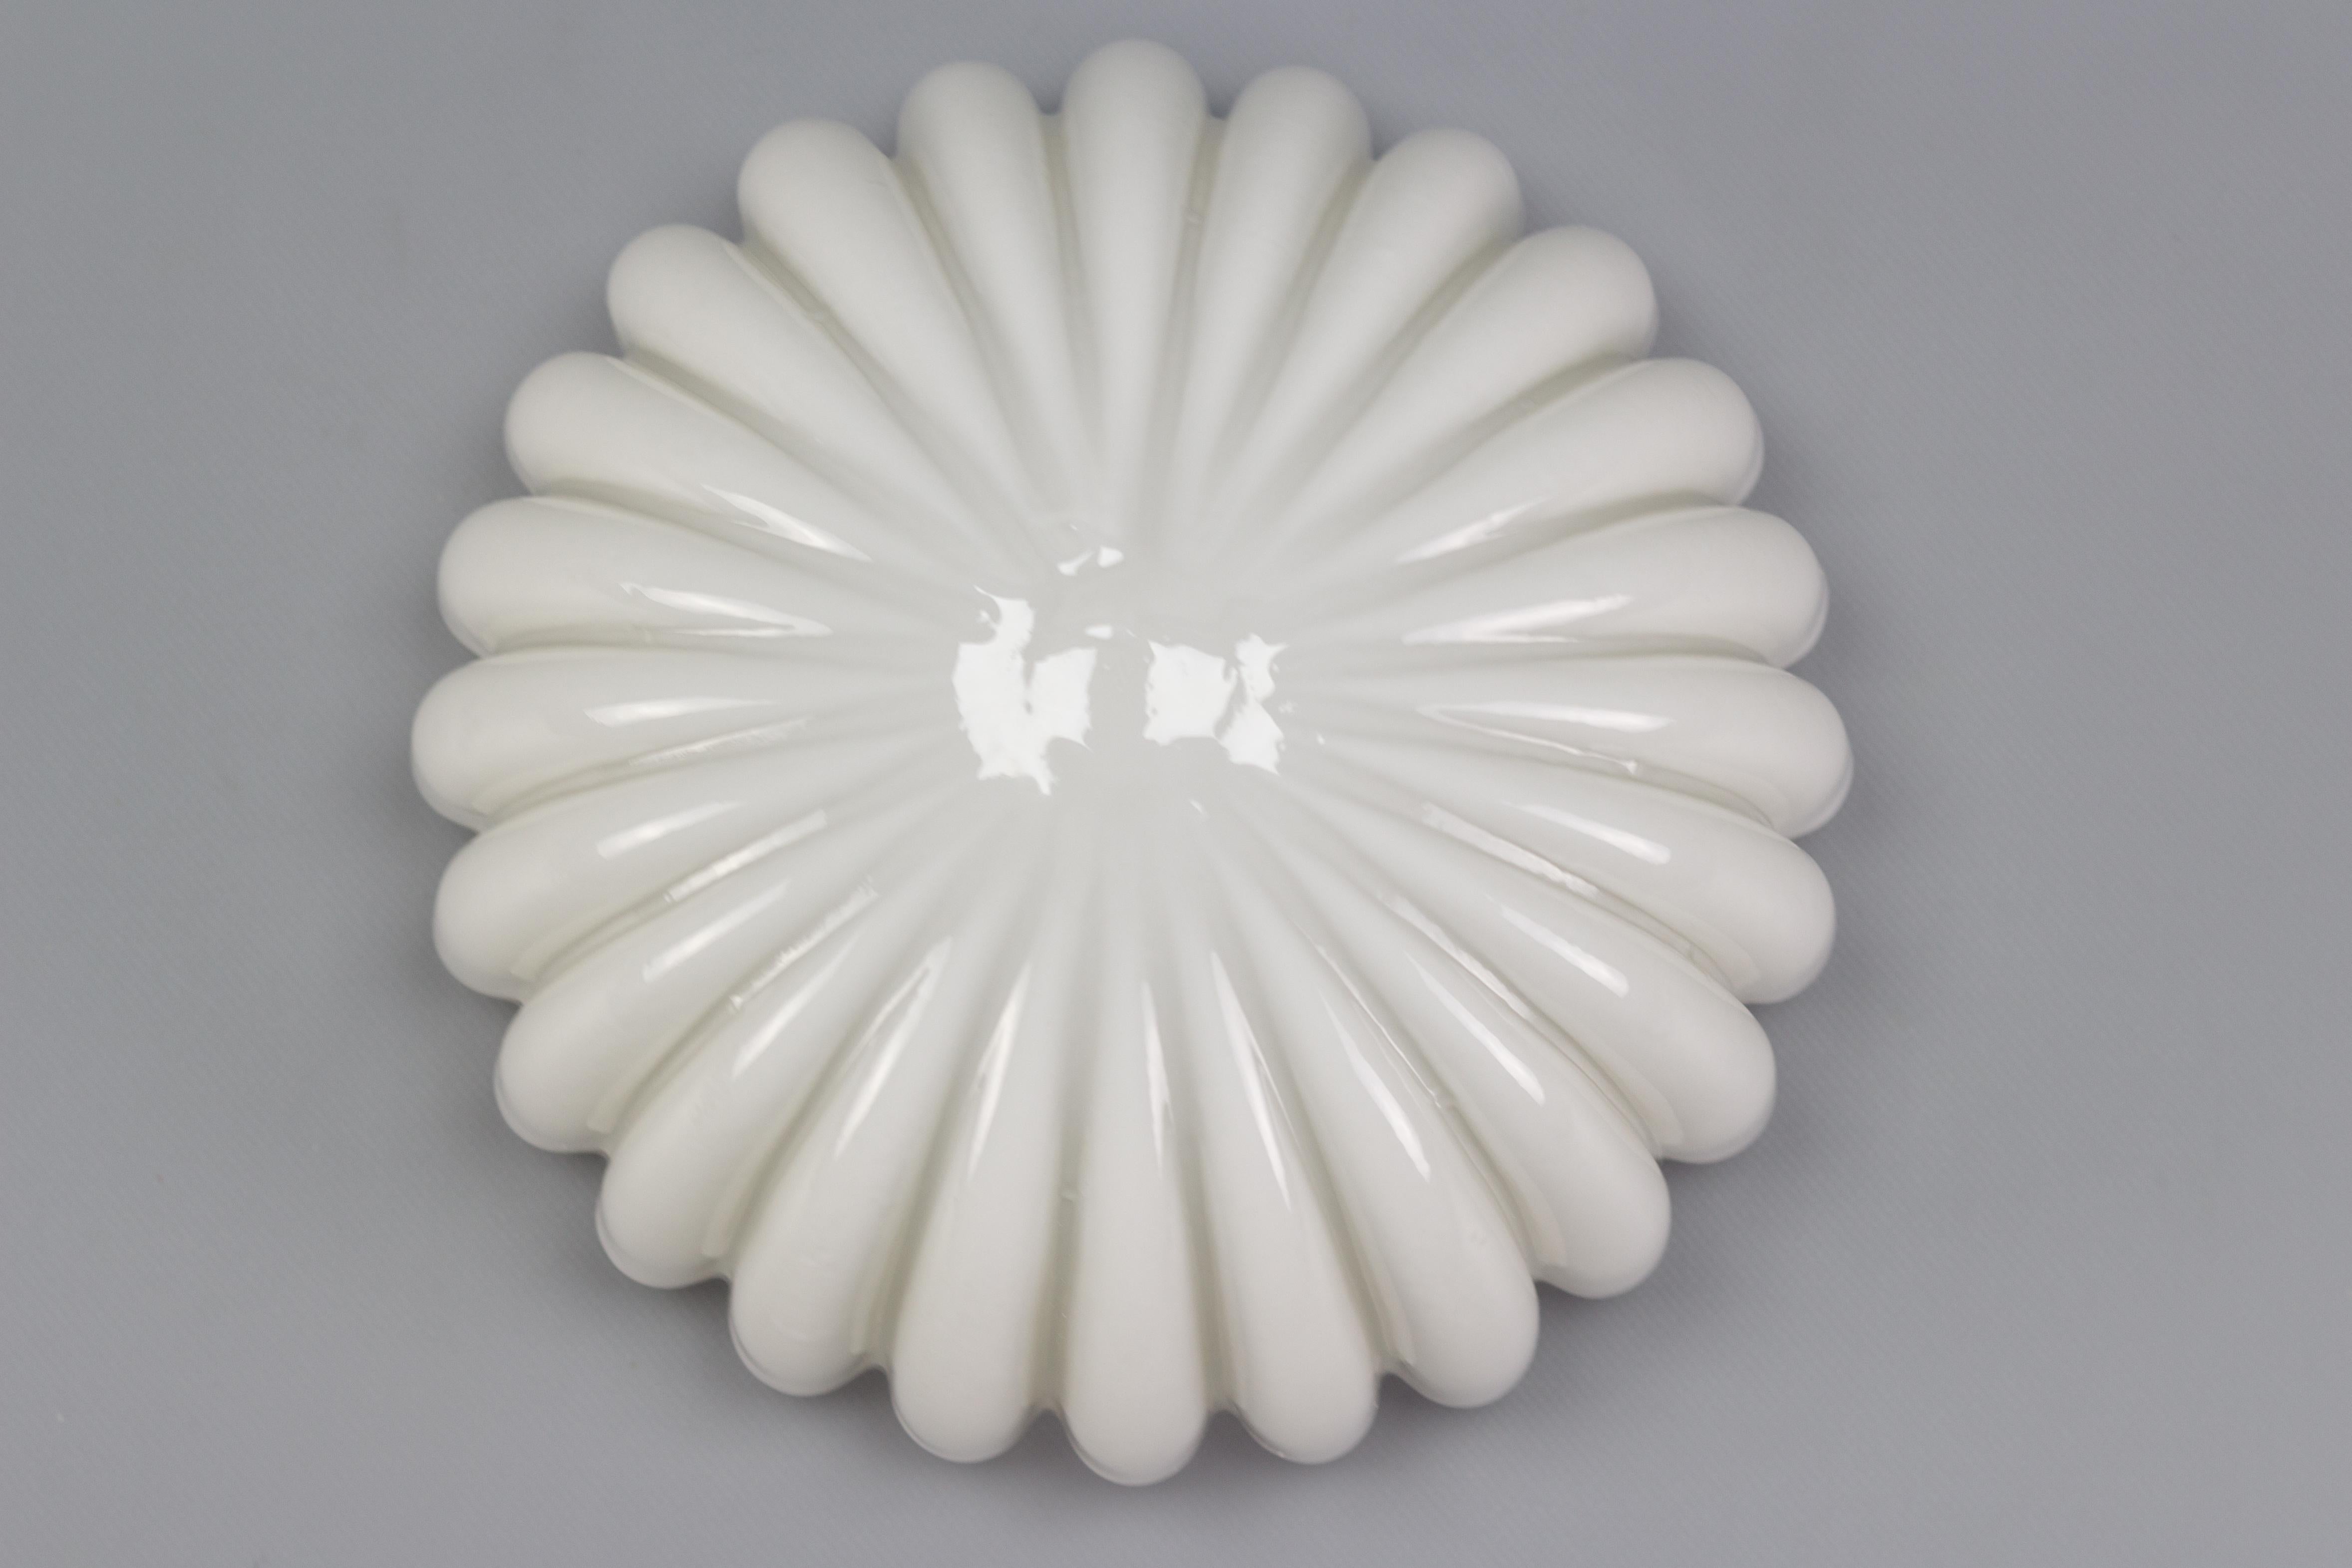 An adorable flower-shaped white opaque glass flush mount or wall light by Doria Leuchten, the 1960s, Germany.
One socket for a light bulb of size E27 (E26).
Dimensions: height: 15 cm / 5.9 in; diameter: 26 cm / 10.23 in.
  